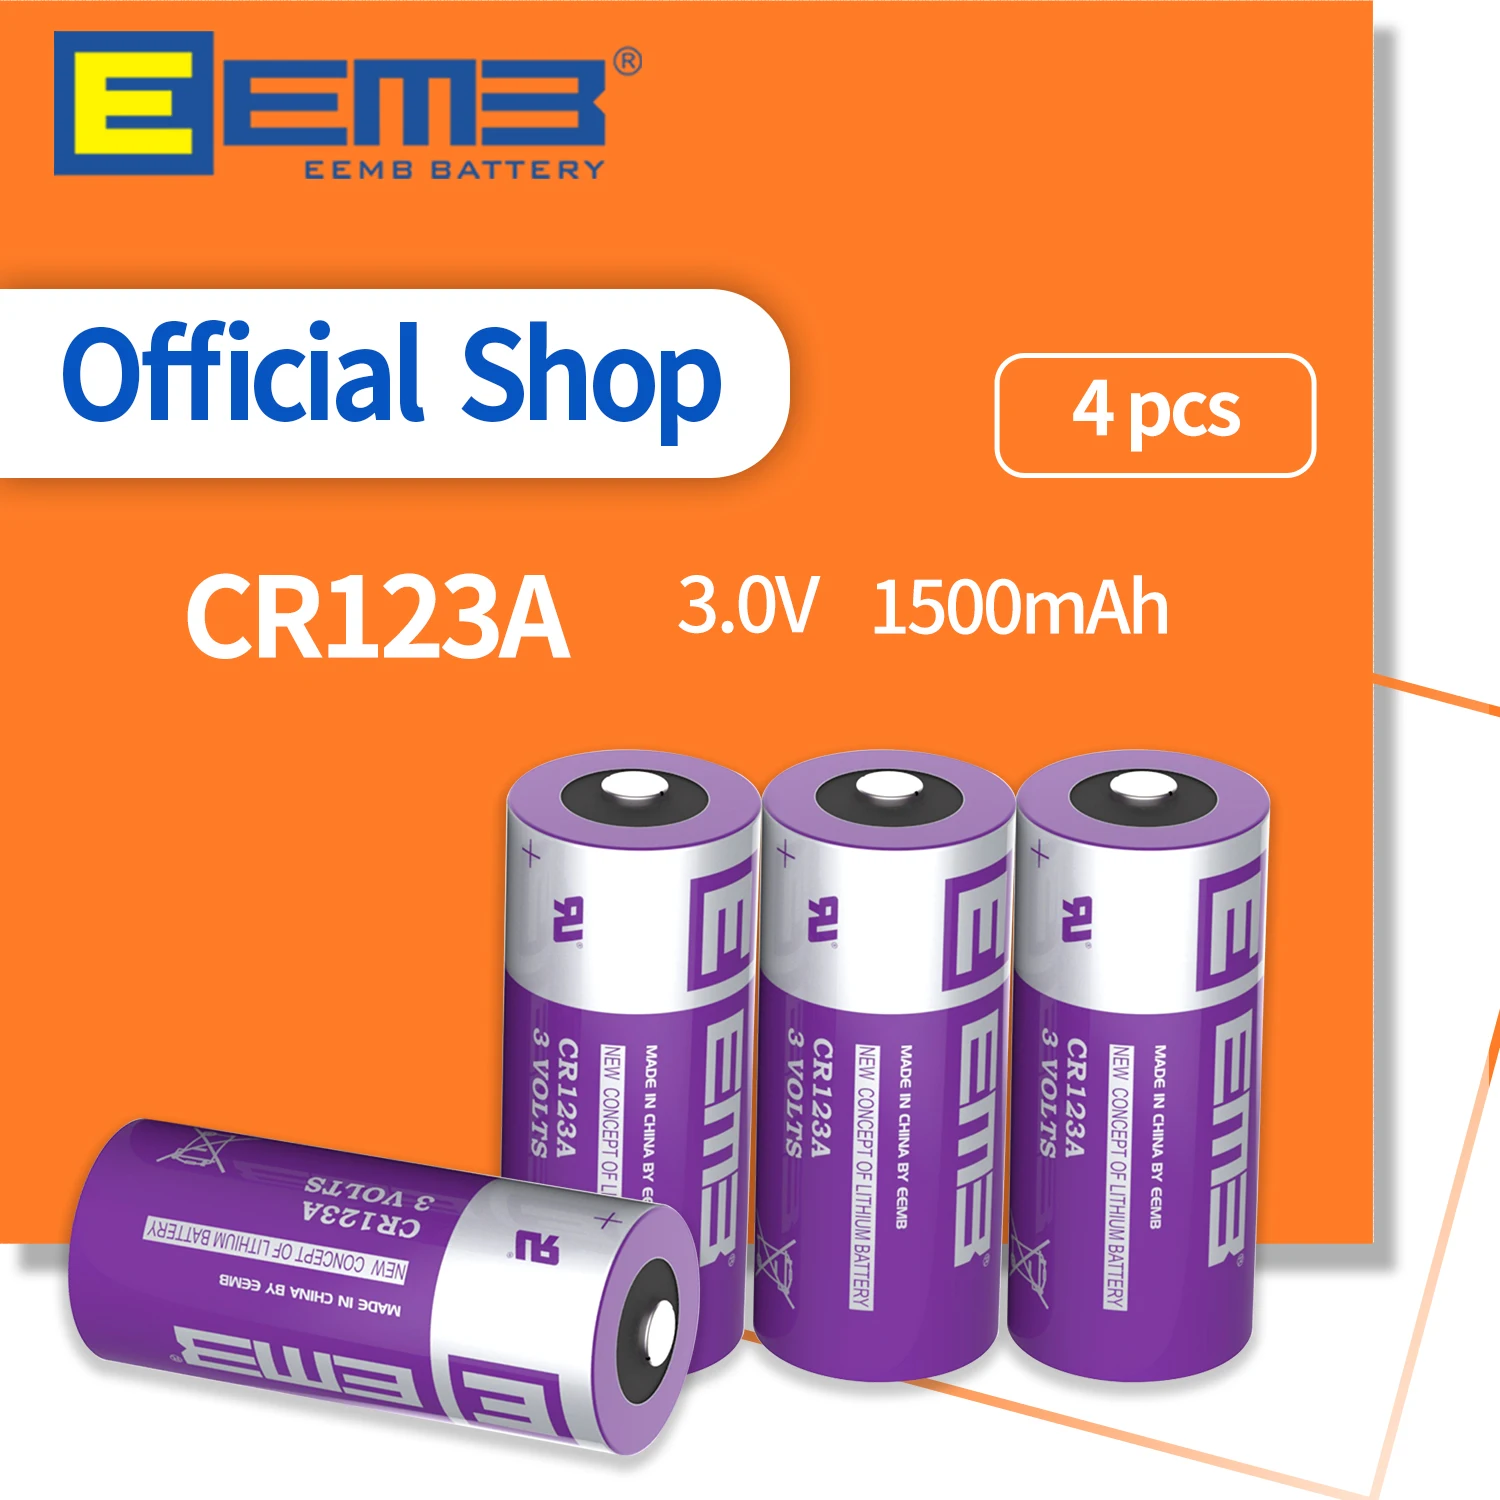 

EEMB 3V CR123A Lithium Battery 1500mAh Non-Rechargeable Battery for Microphones Camera Smoke Detector Doorbell Toy Flashlight